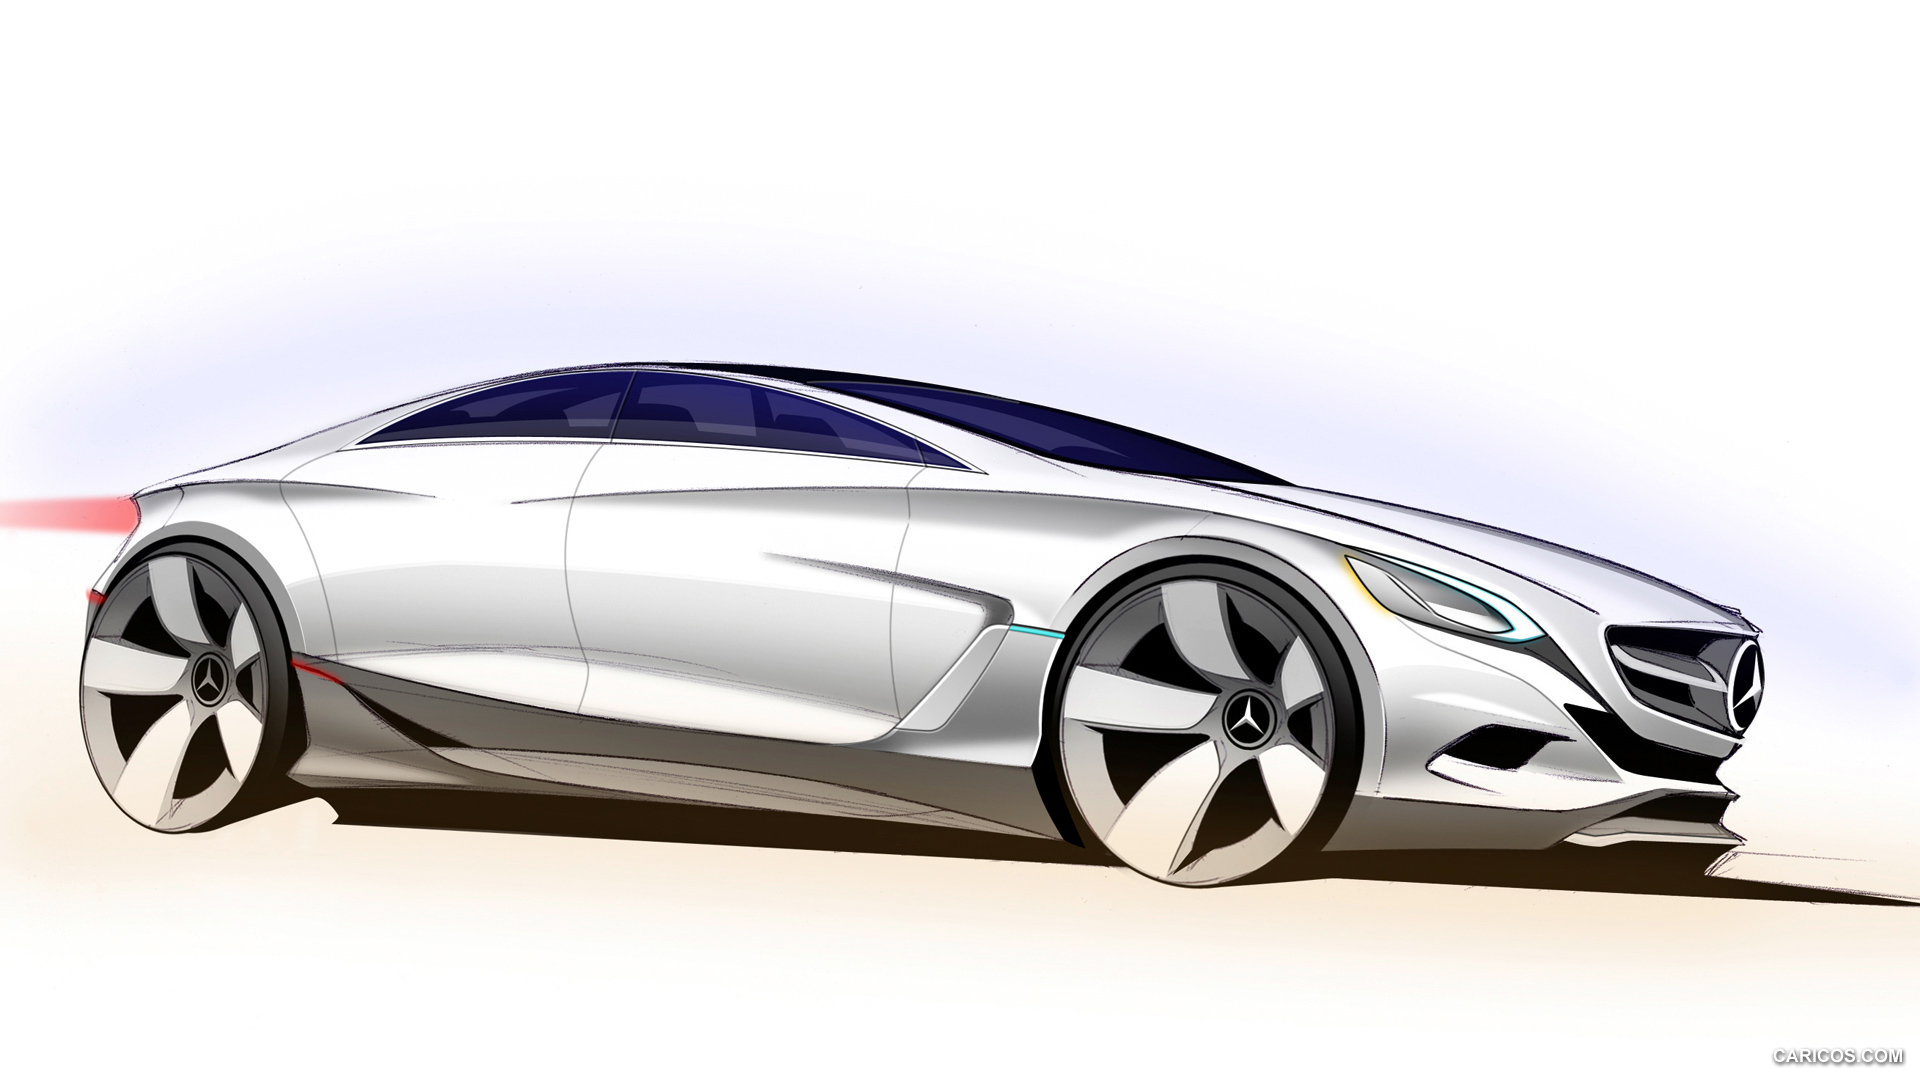 Mercedes-Benz F800 Style Concept (2010)  - Design Sketch, #82 of 120